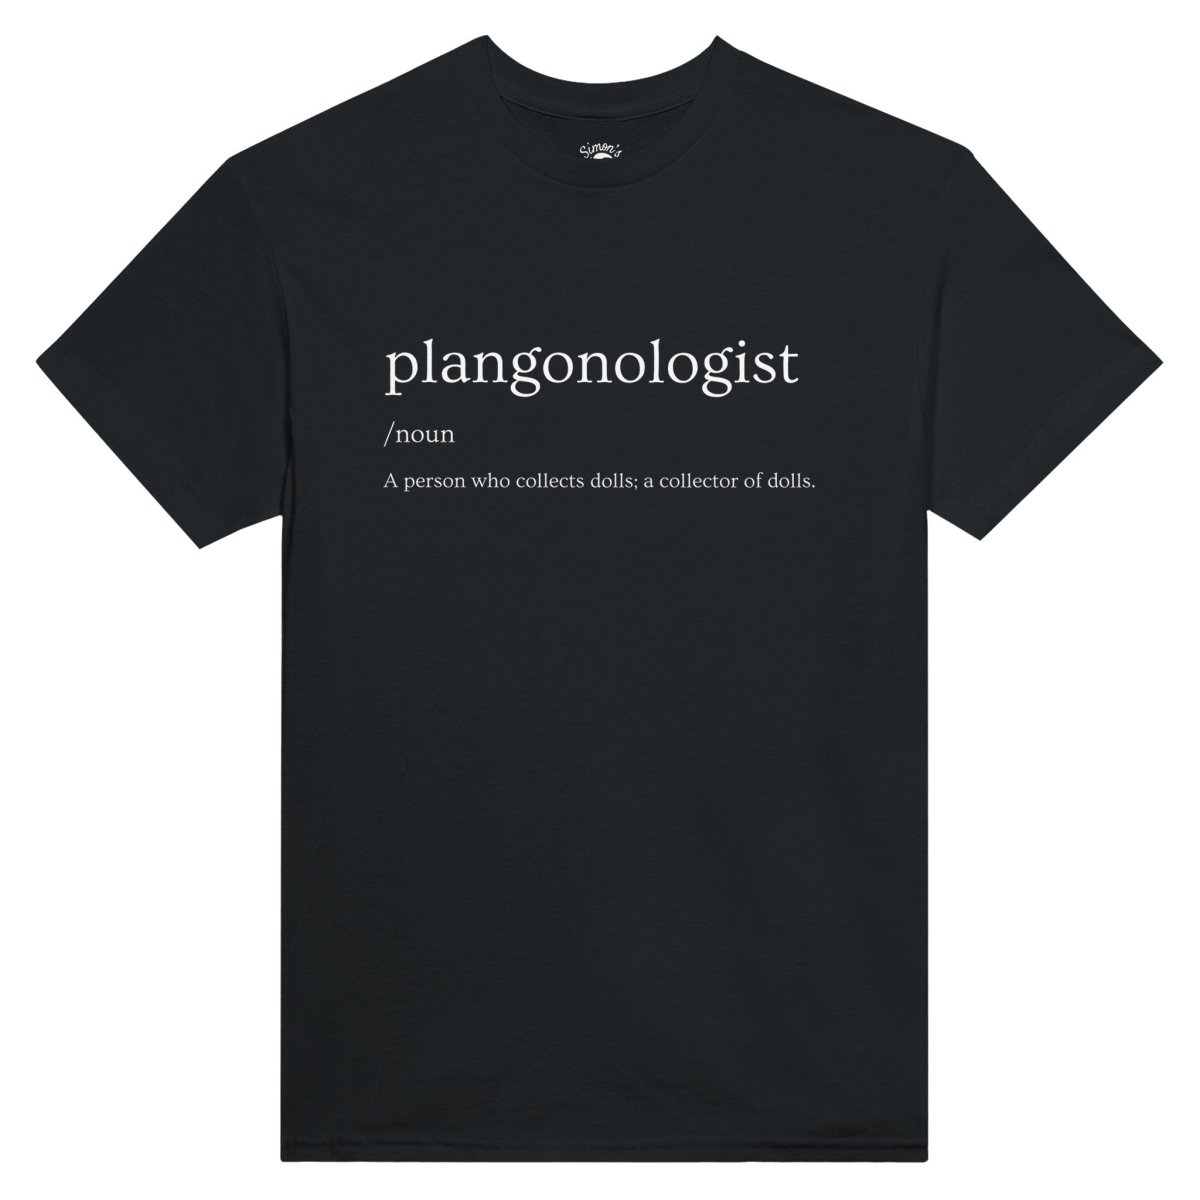 'Plangonologist' Definition Heavyweight Unisex Crewneck T-shirt - Doll Collector - Simon's Collectibles